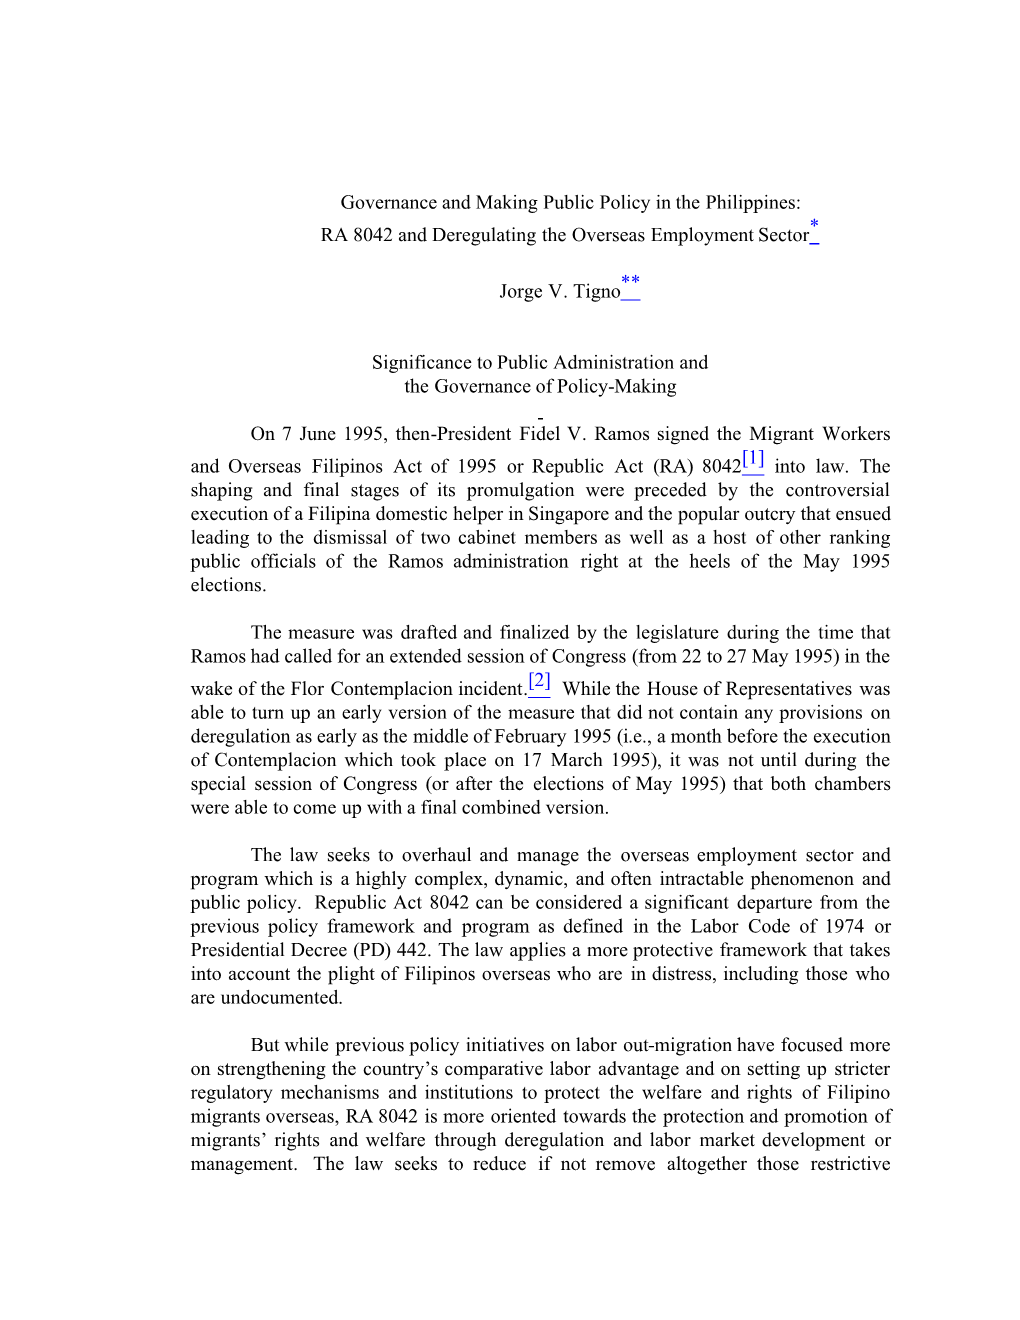 Governance and Making Public Policy in the Philippines: RA 8042 and Deregulating the Overseas Employment Sector*